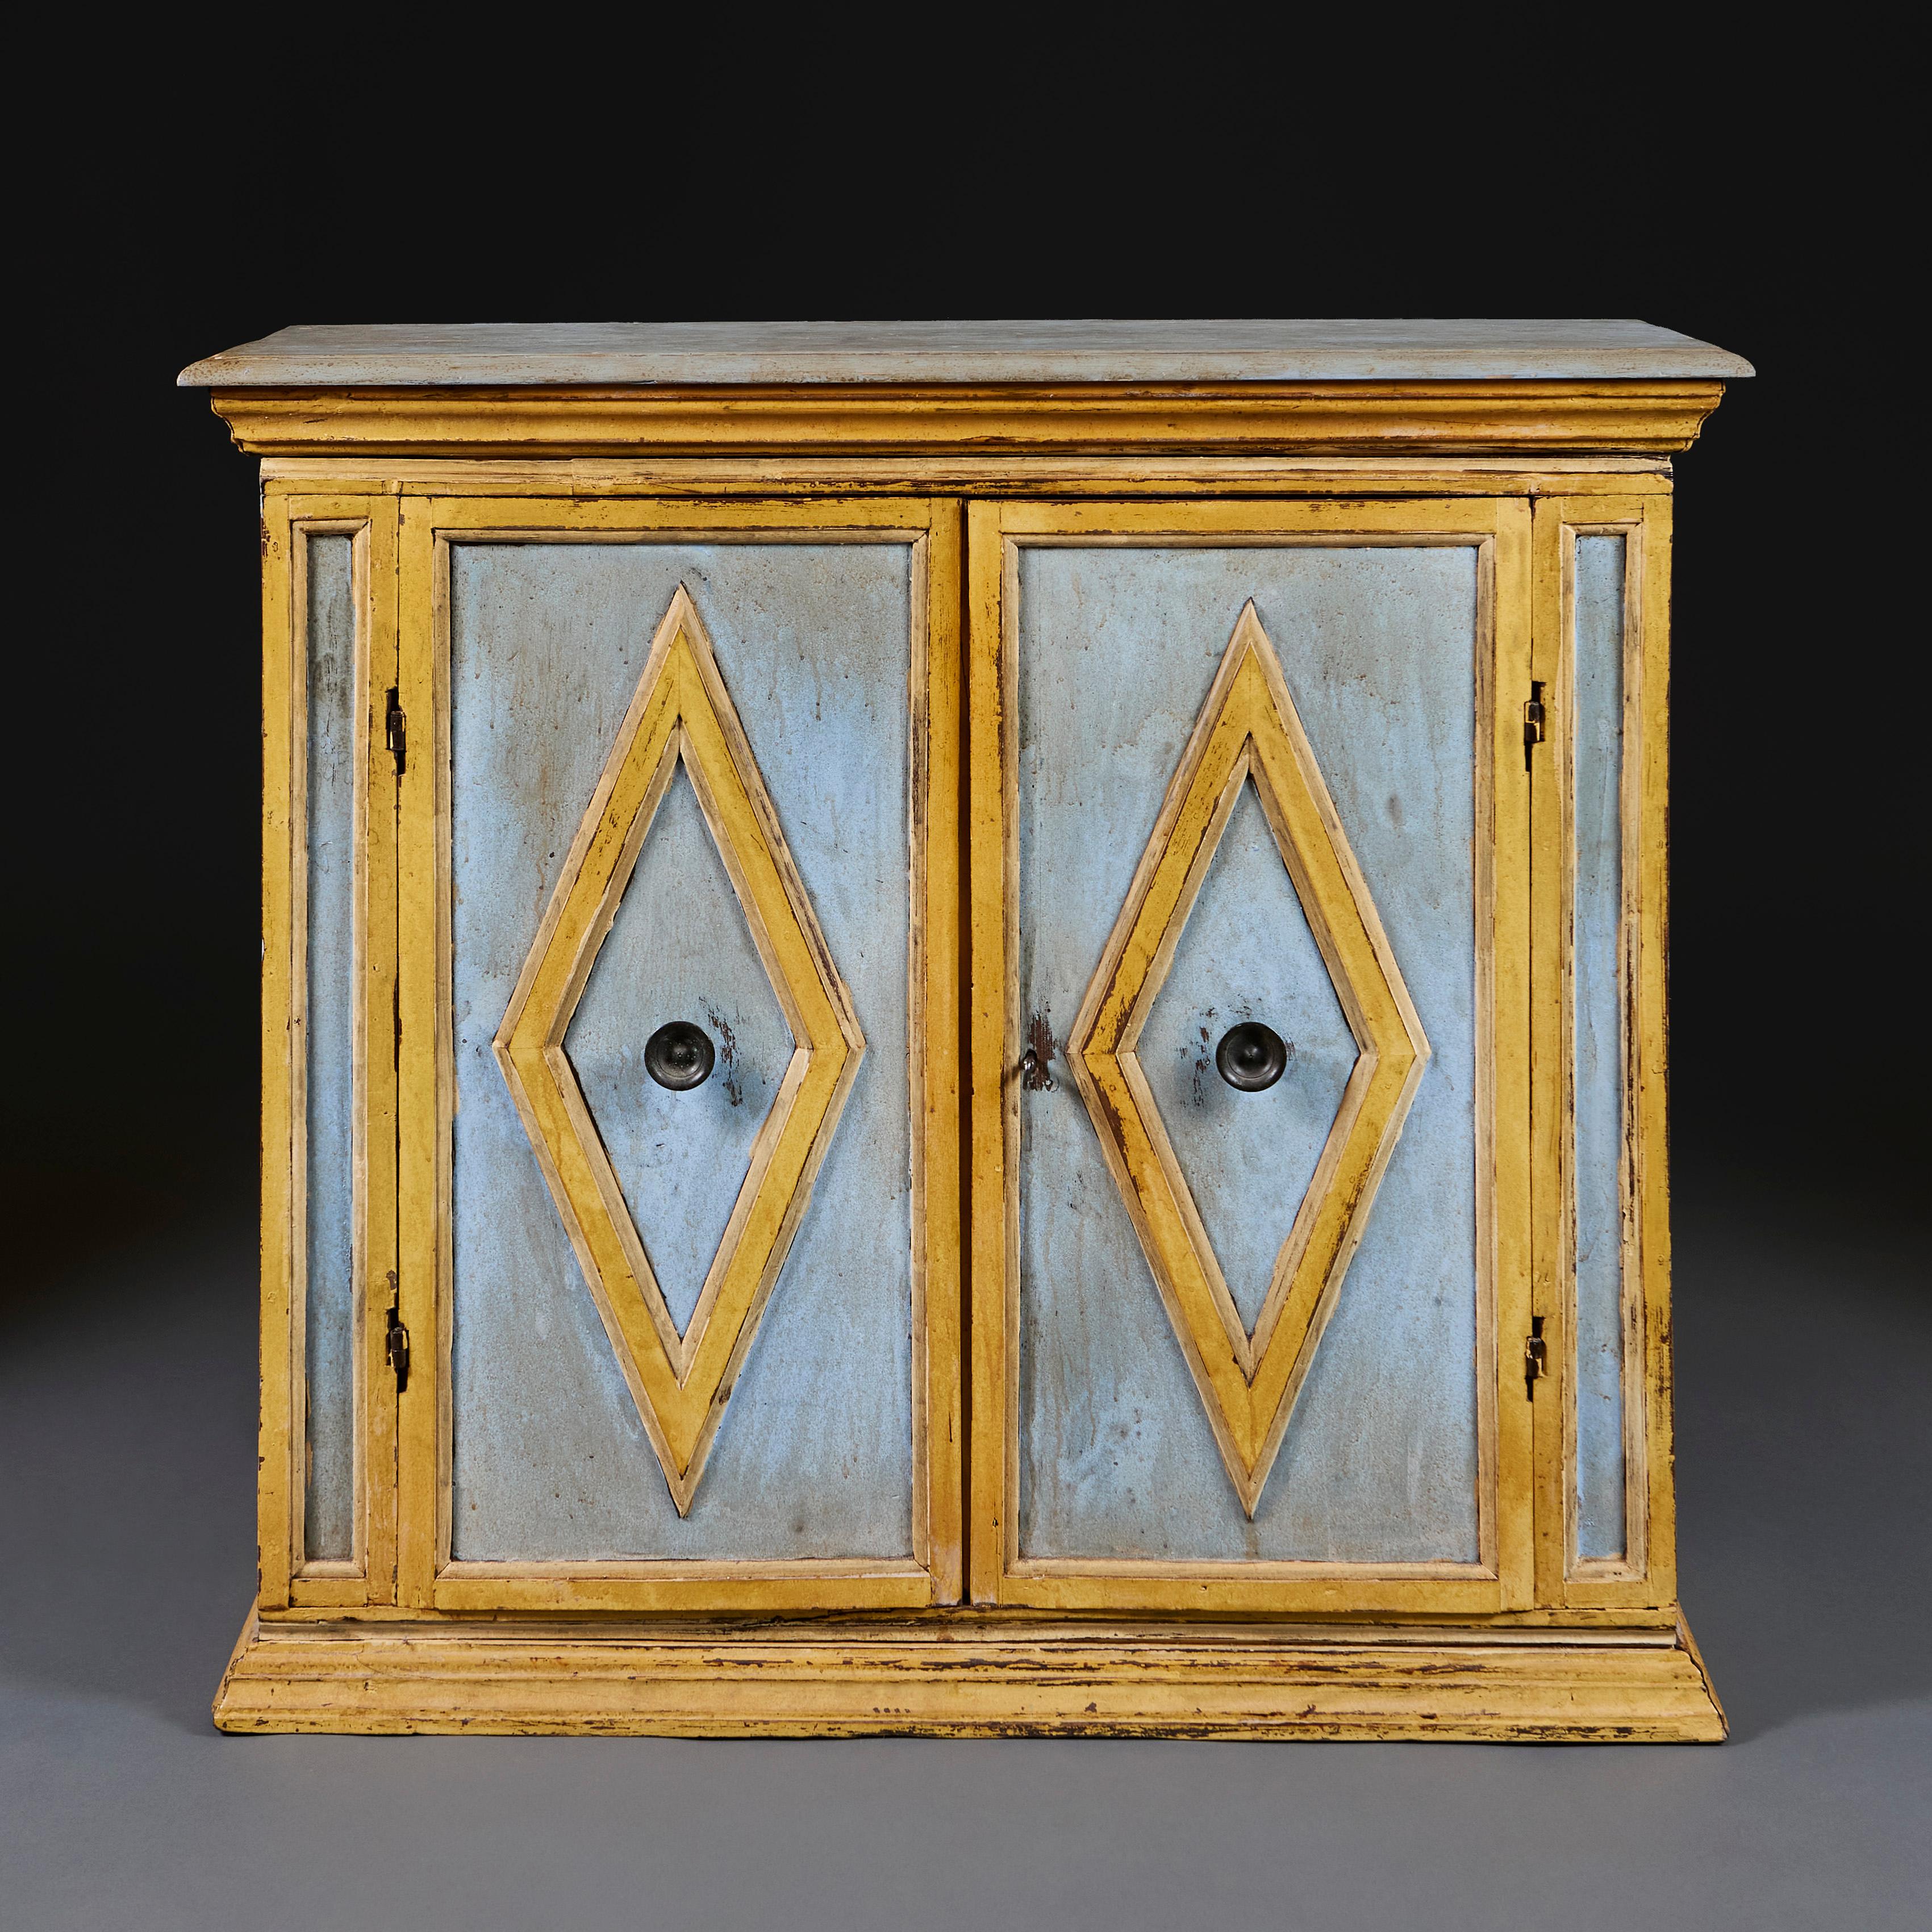 Italy, circa 1860

A mid nineteenth century painted side cabinet with cornice and plinth, the door applied with diamond decoration and the interior revealing a single shelf.

Height 95.00cm
Width 107.00cm
Depth 40.00cm.